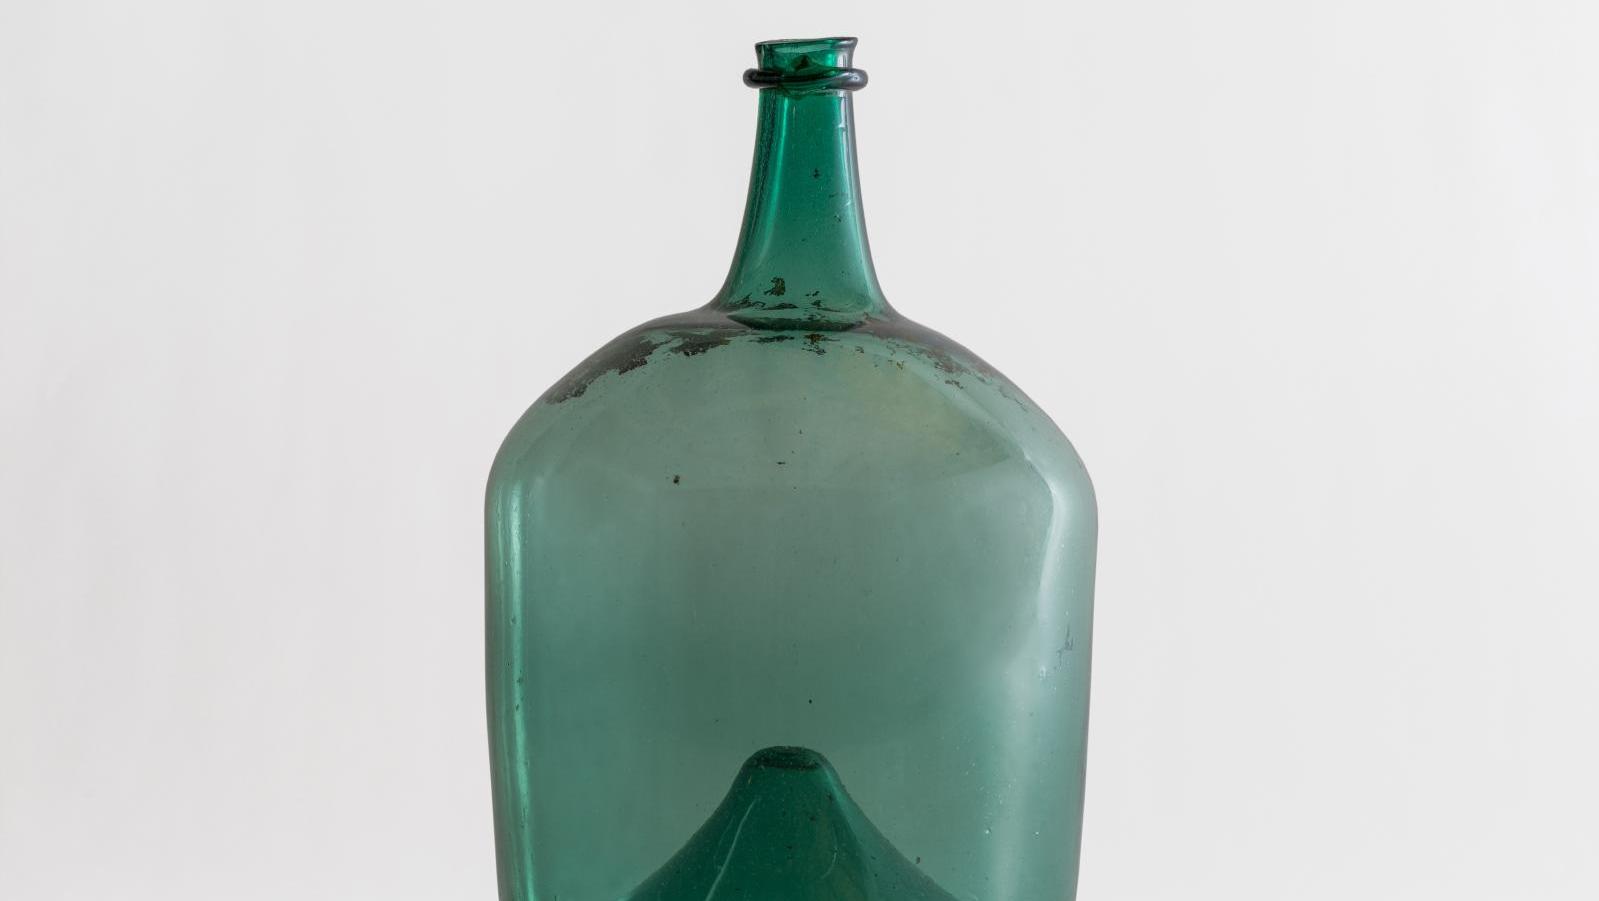 Carboy or demijohn, forest glass works in South-West Languedoc, France (Carmaux,... B for Bottle 